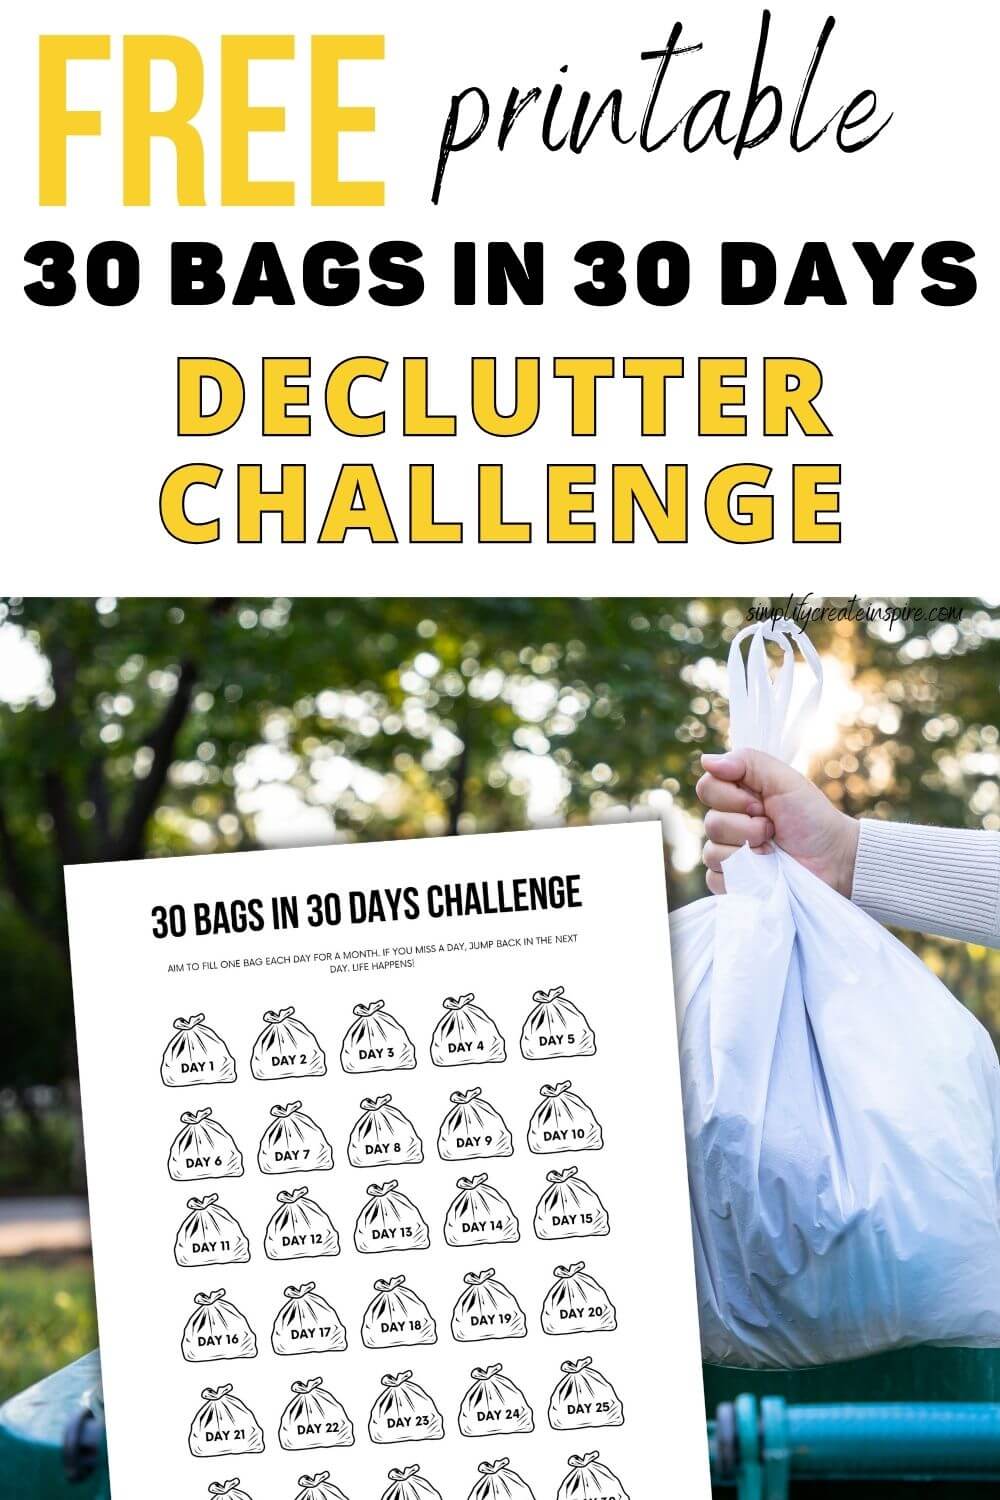 Pinterest image -30 bags in 30 days declutter challenge free printable.